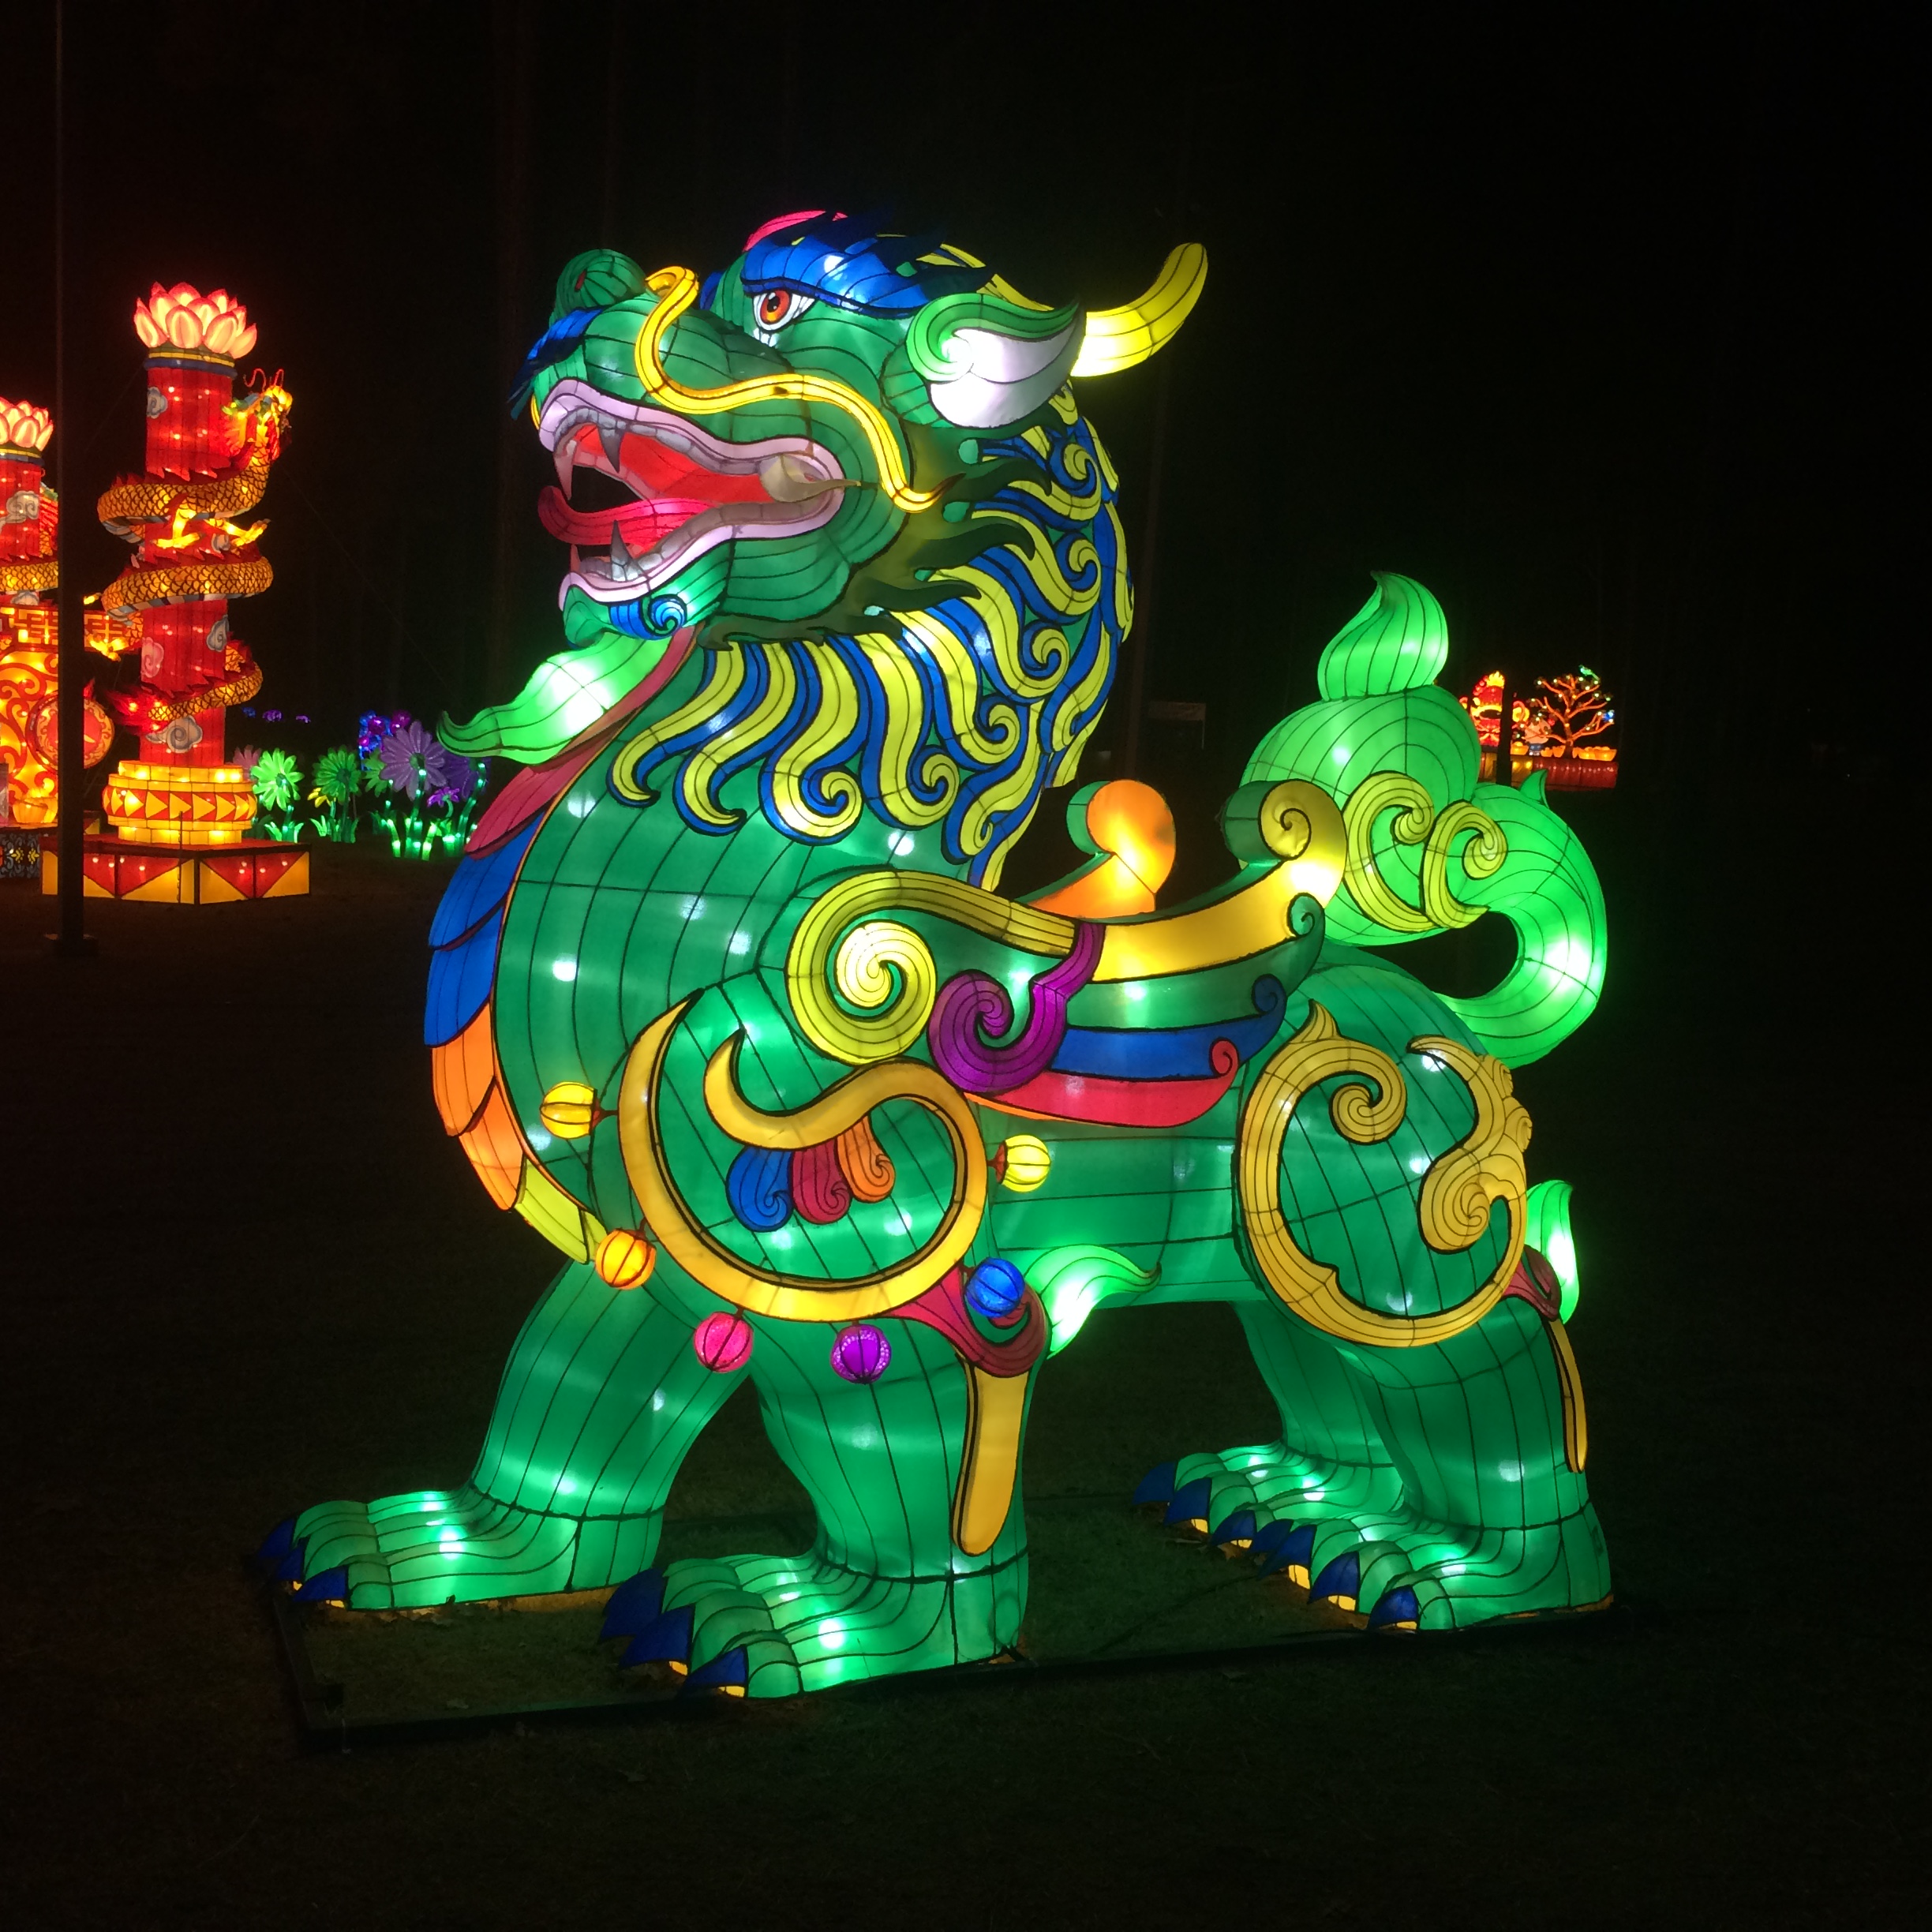 chinese light festival cary nc